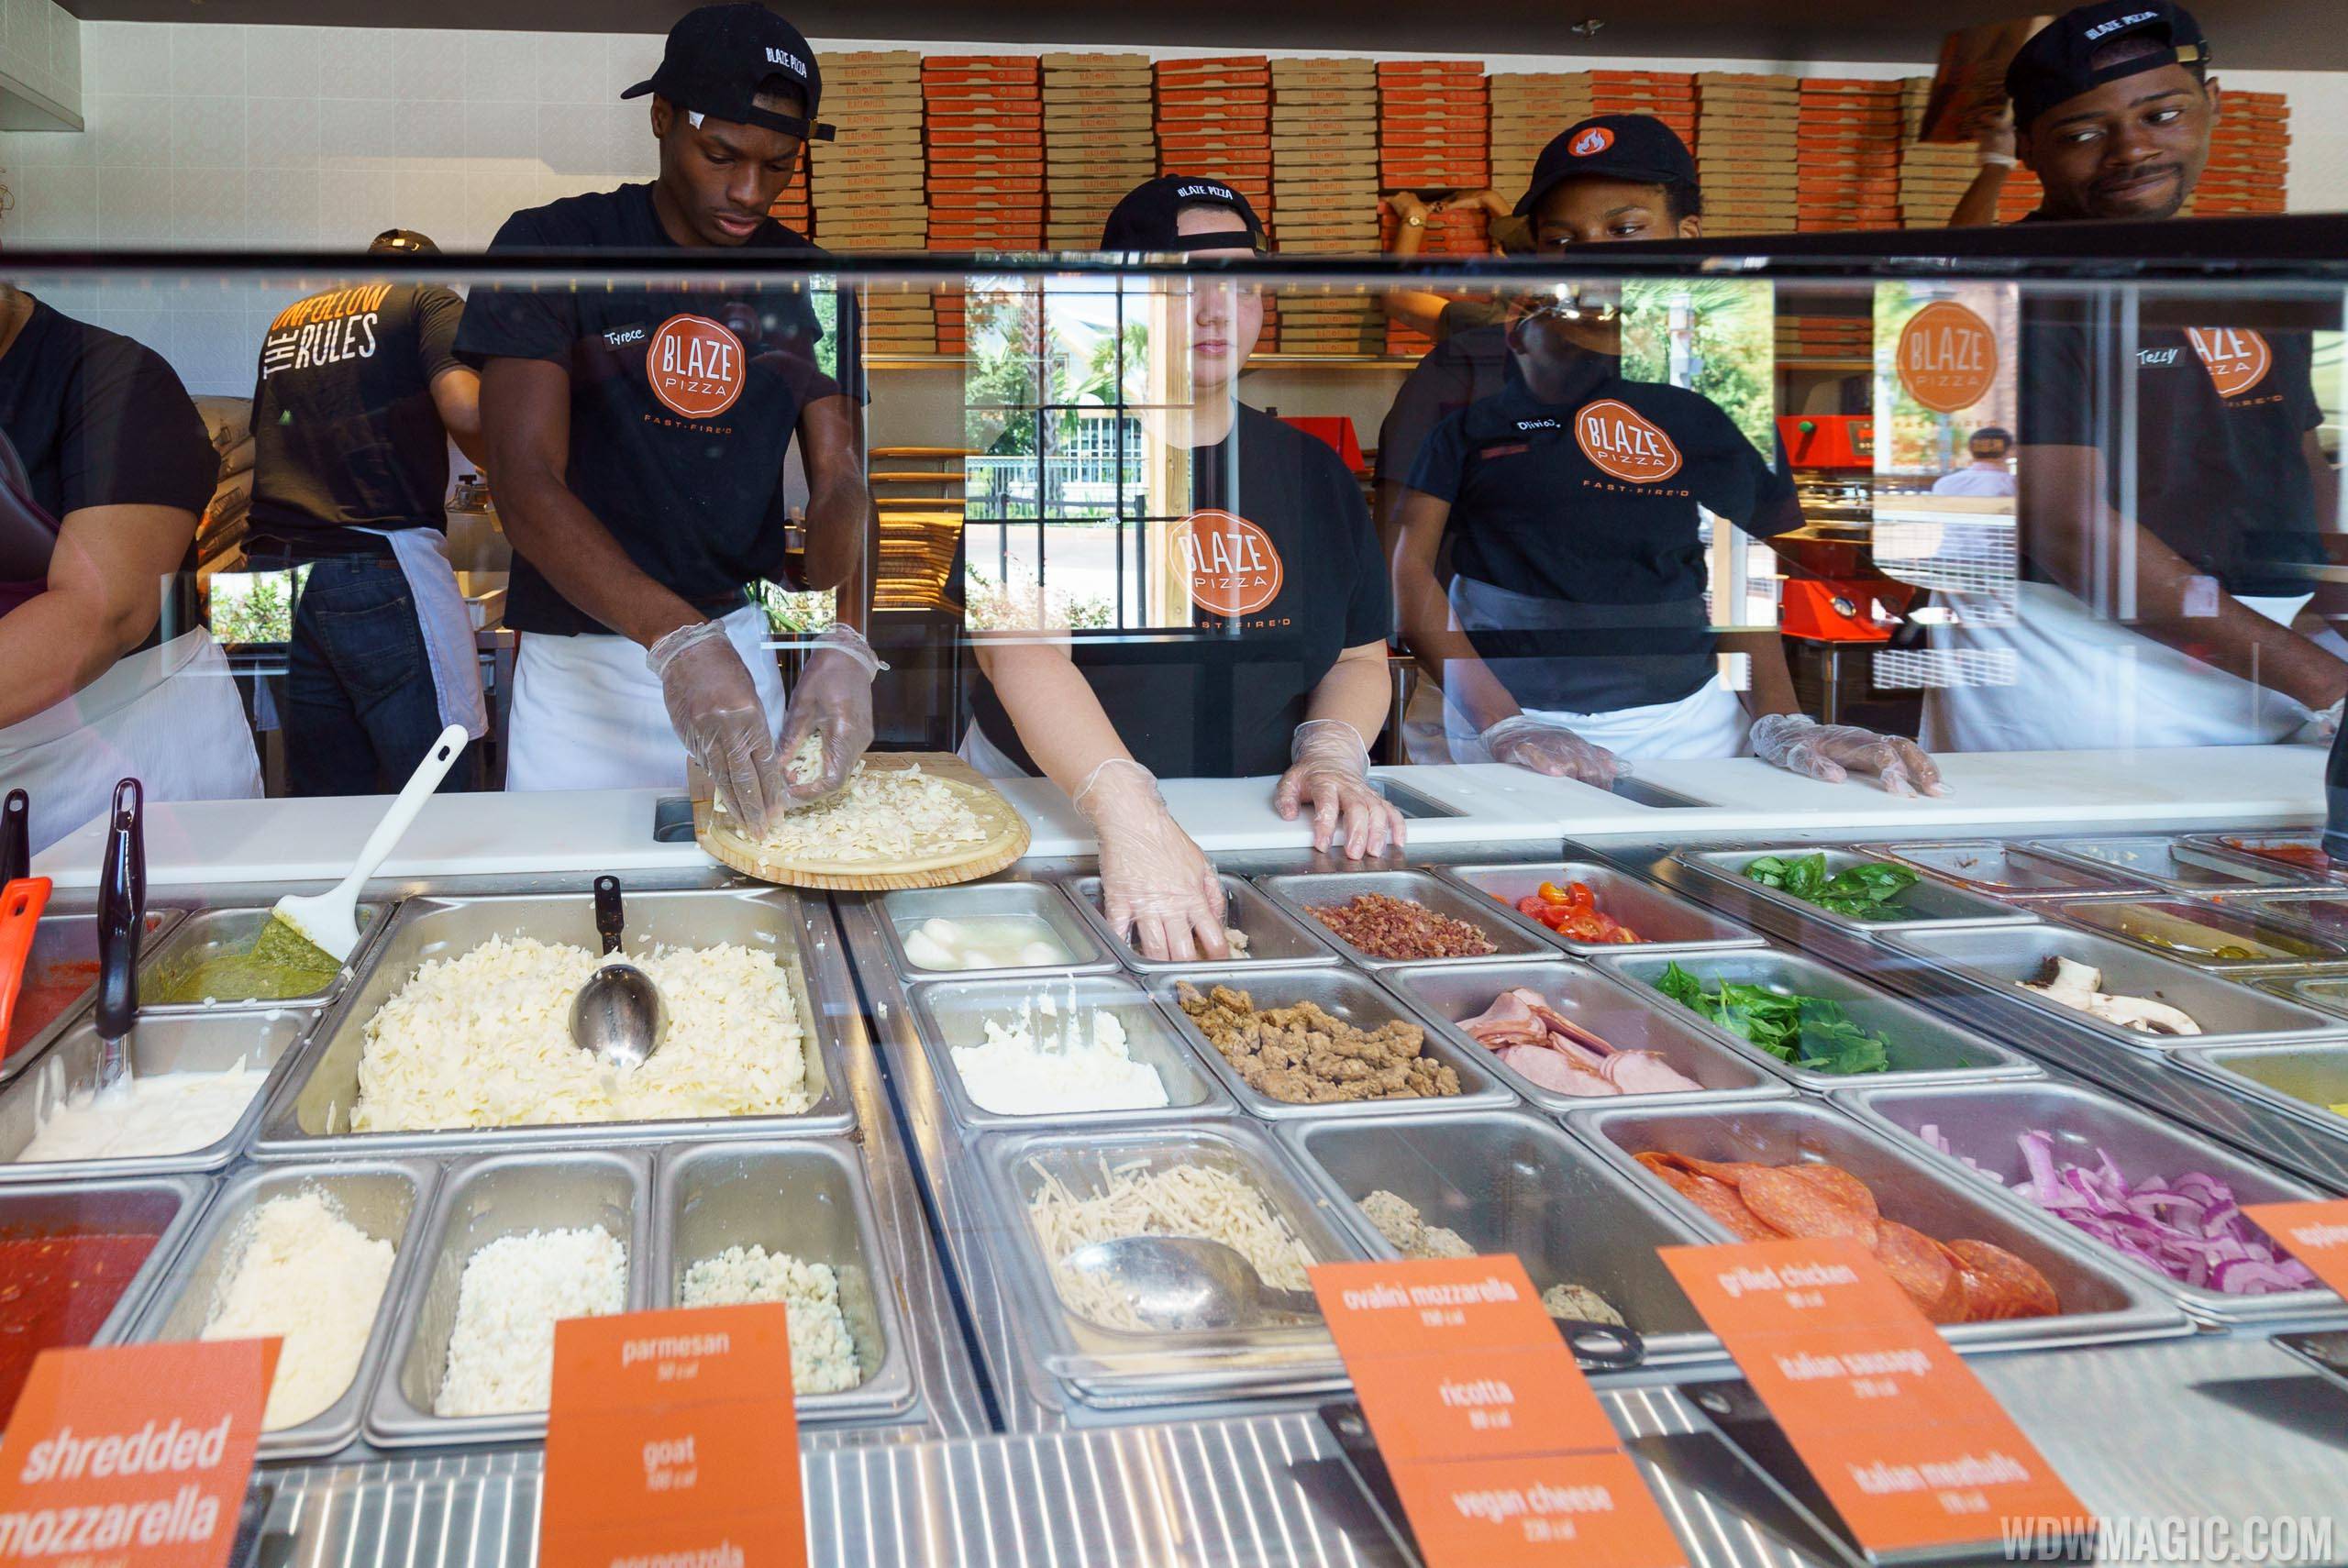 Building the pizza at Blaze Pizza